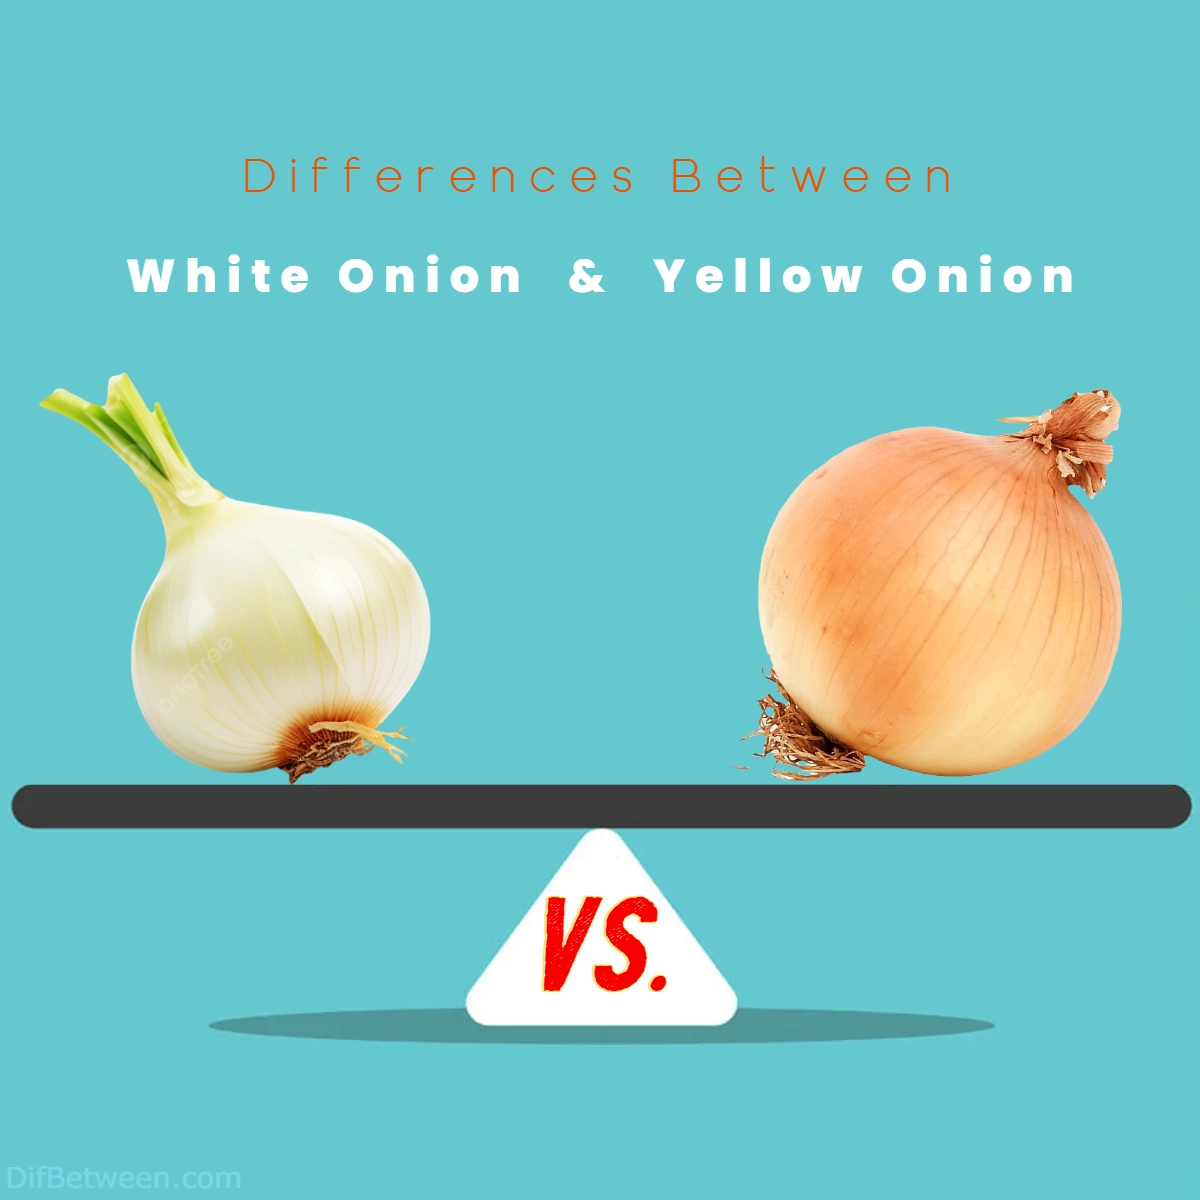 Difference Between White Onion and Yellow Onion